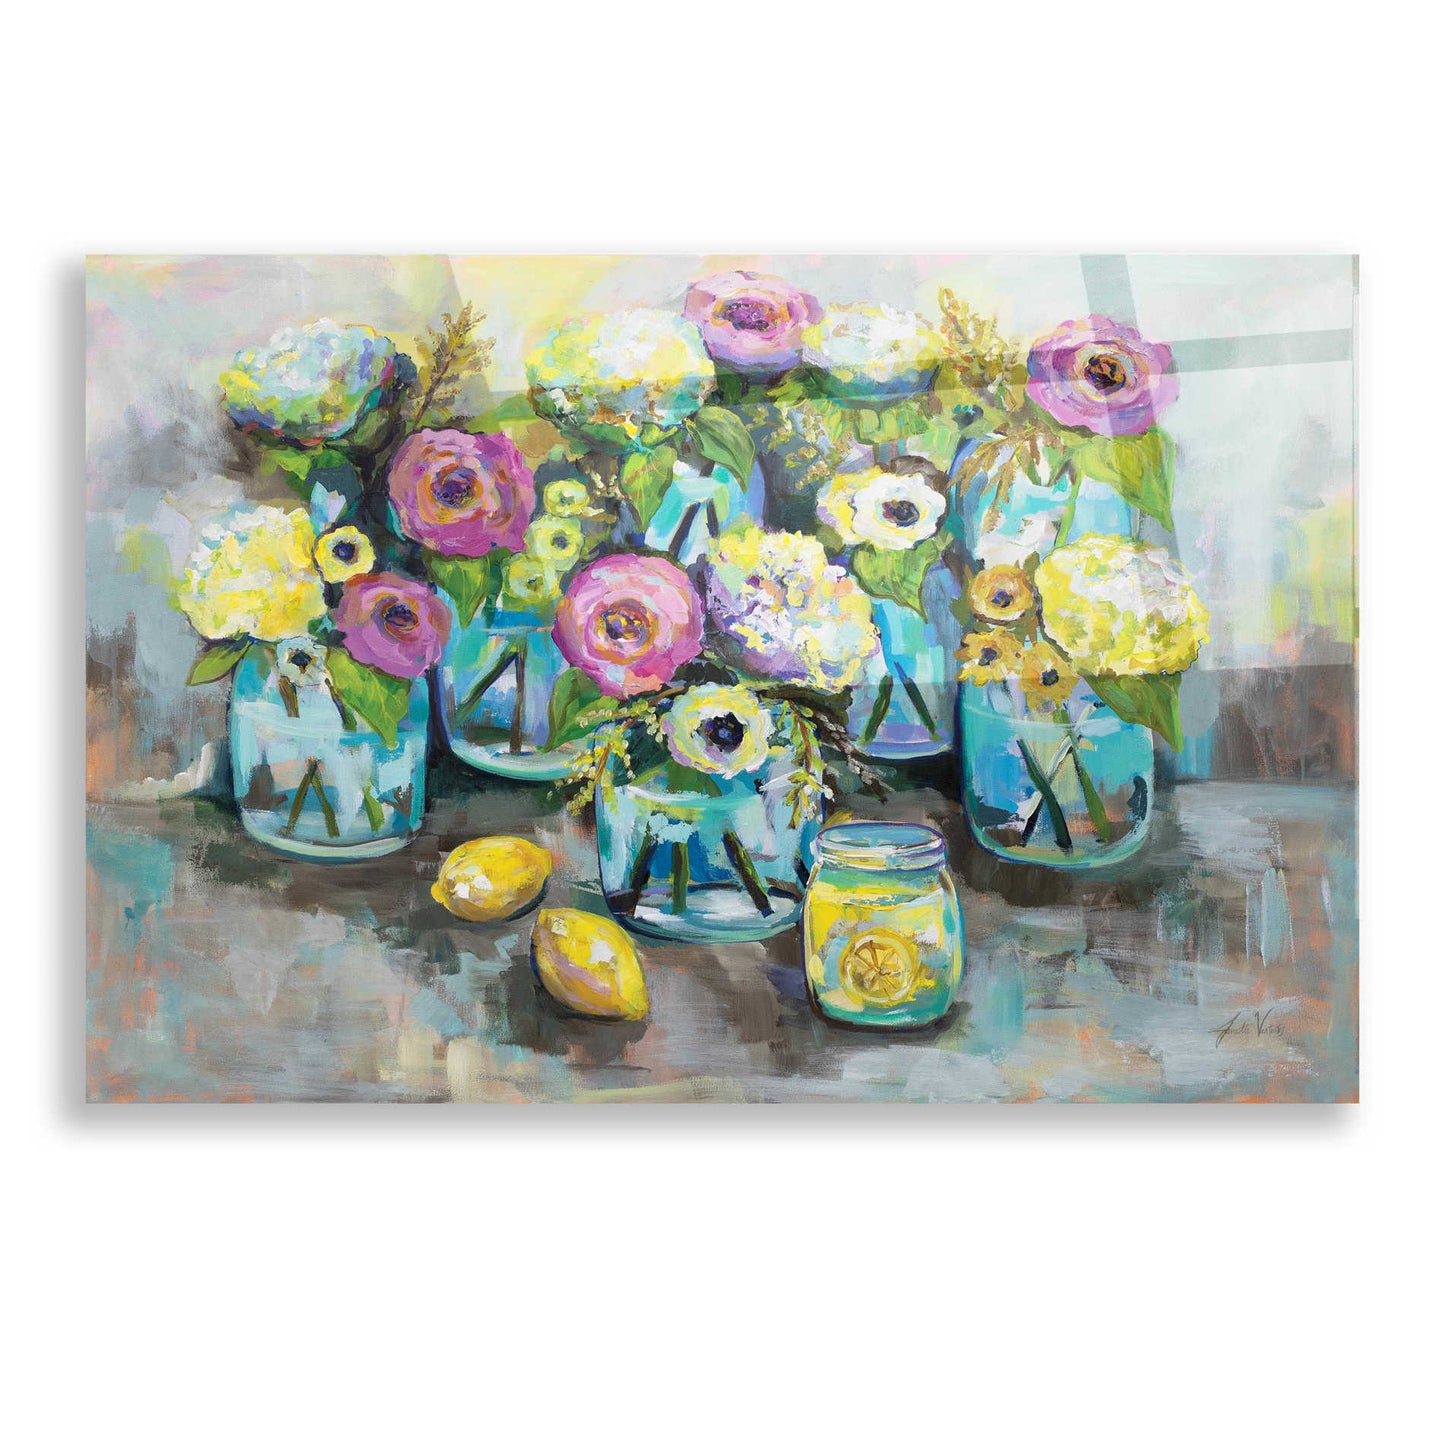 Epic Art 'When Life Gives You Lemons' by Jeanette Vertentes, Acrylic Glass Wall Art,16x12